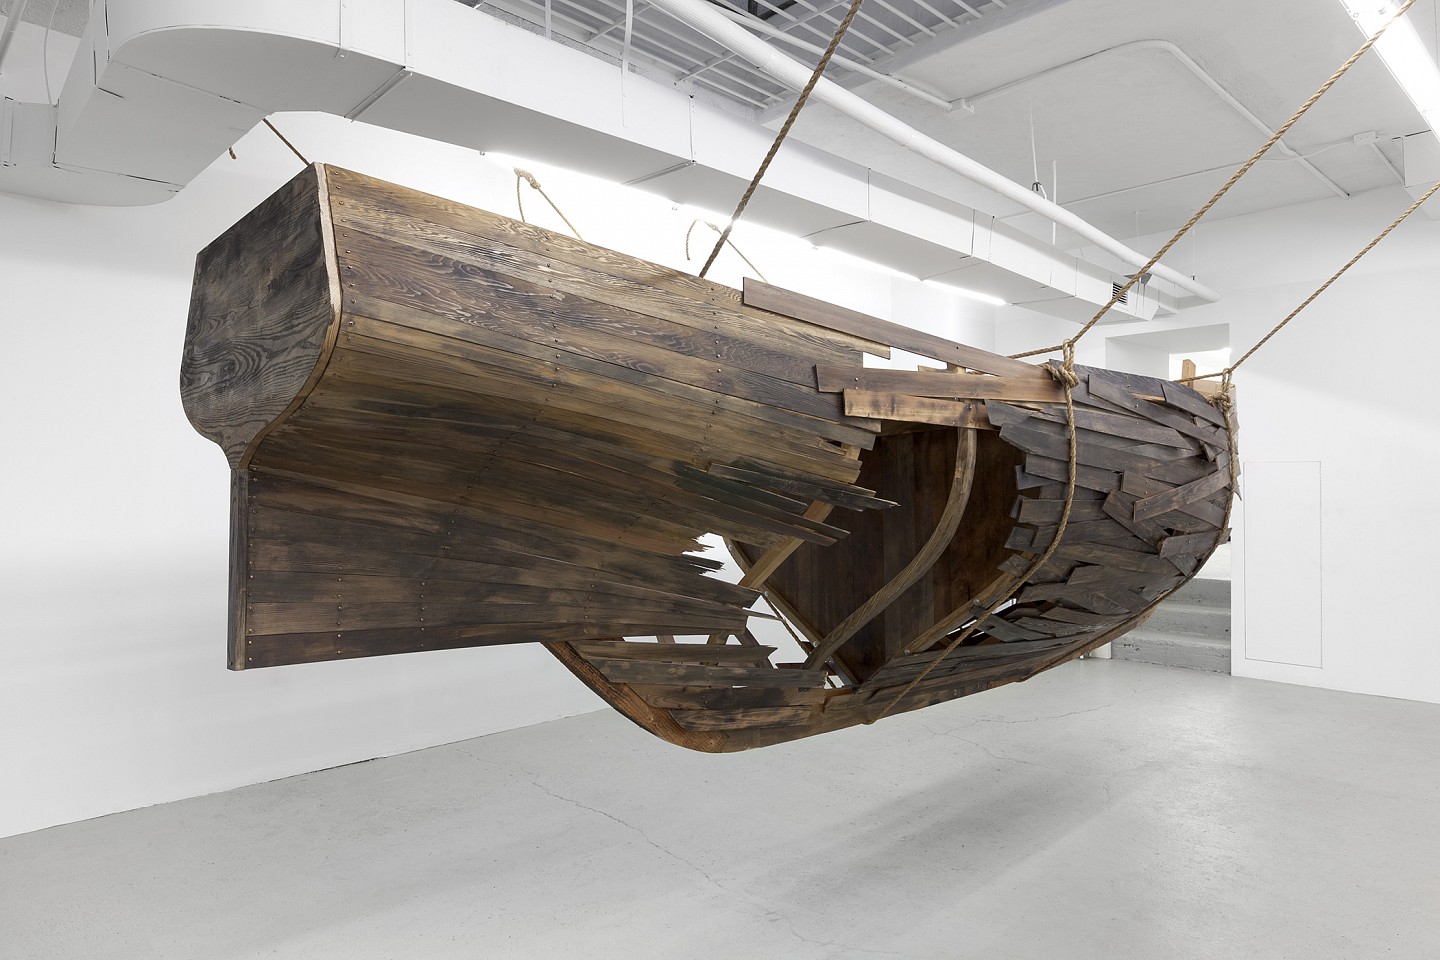 Liz Glynn
Vessel (Ravaged, Looted & Burned), 2013
Hardwood, (Ash and Western Red Cedar) with bronze and steel hardware, rope, 86 x 246 x 73 in.